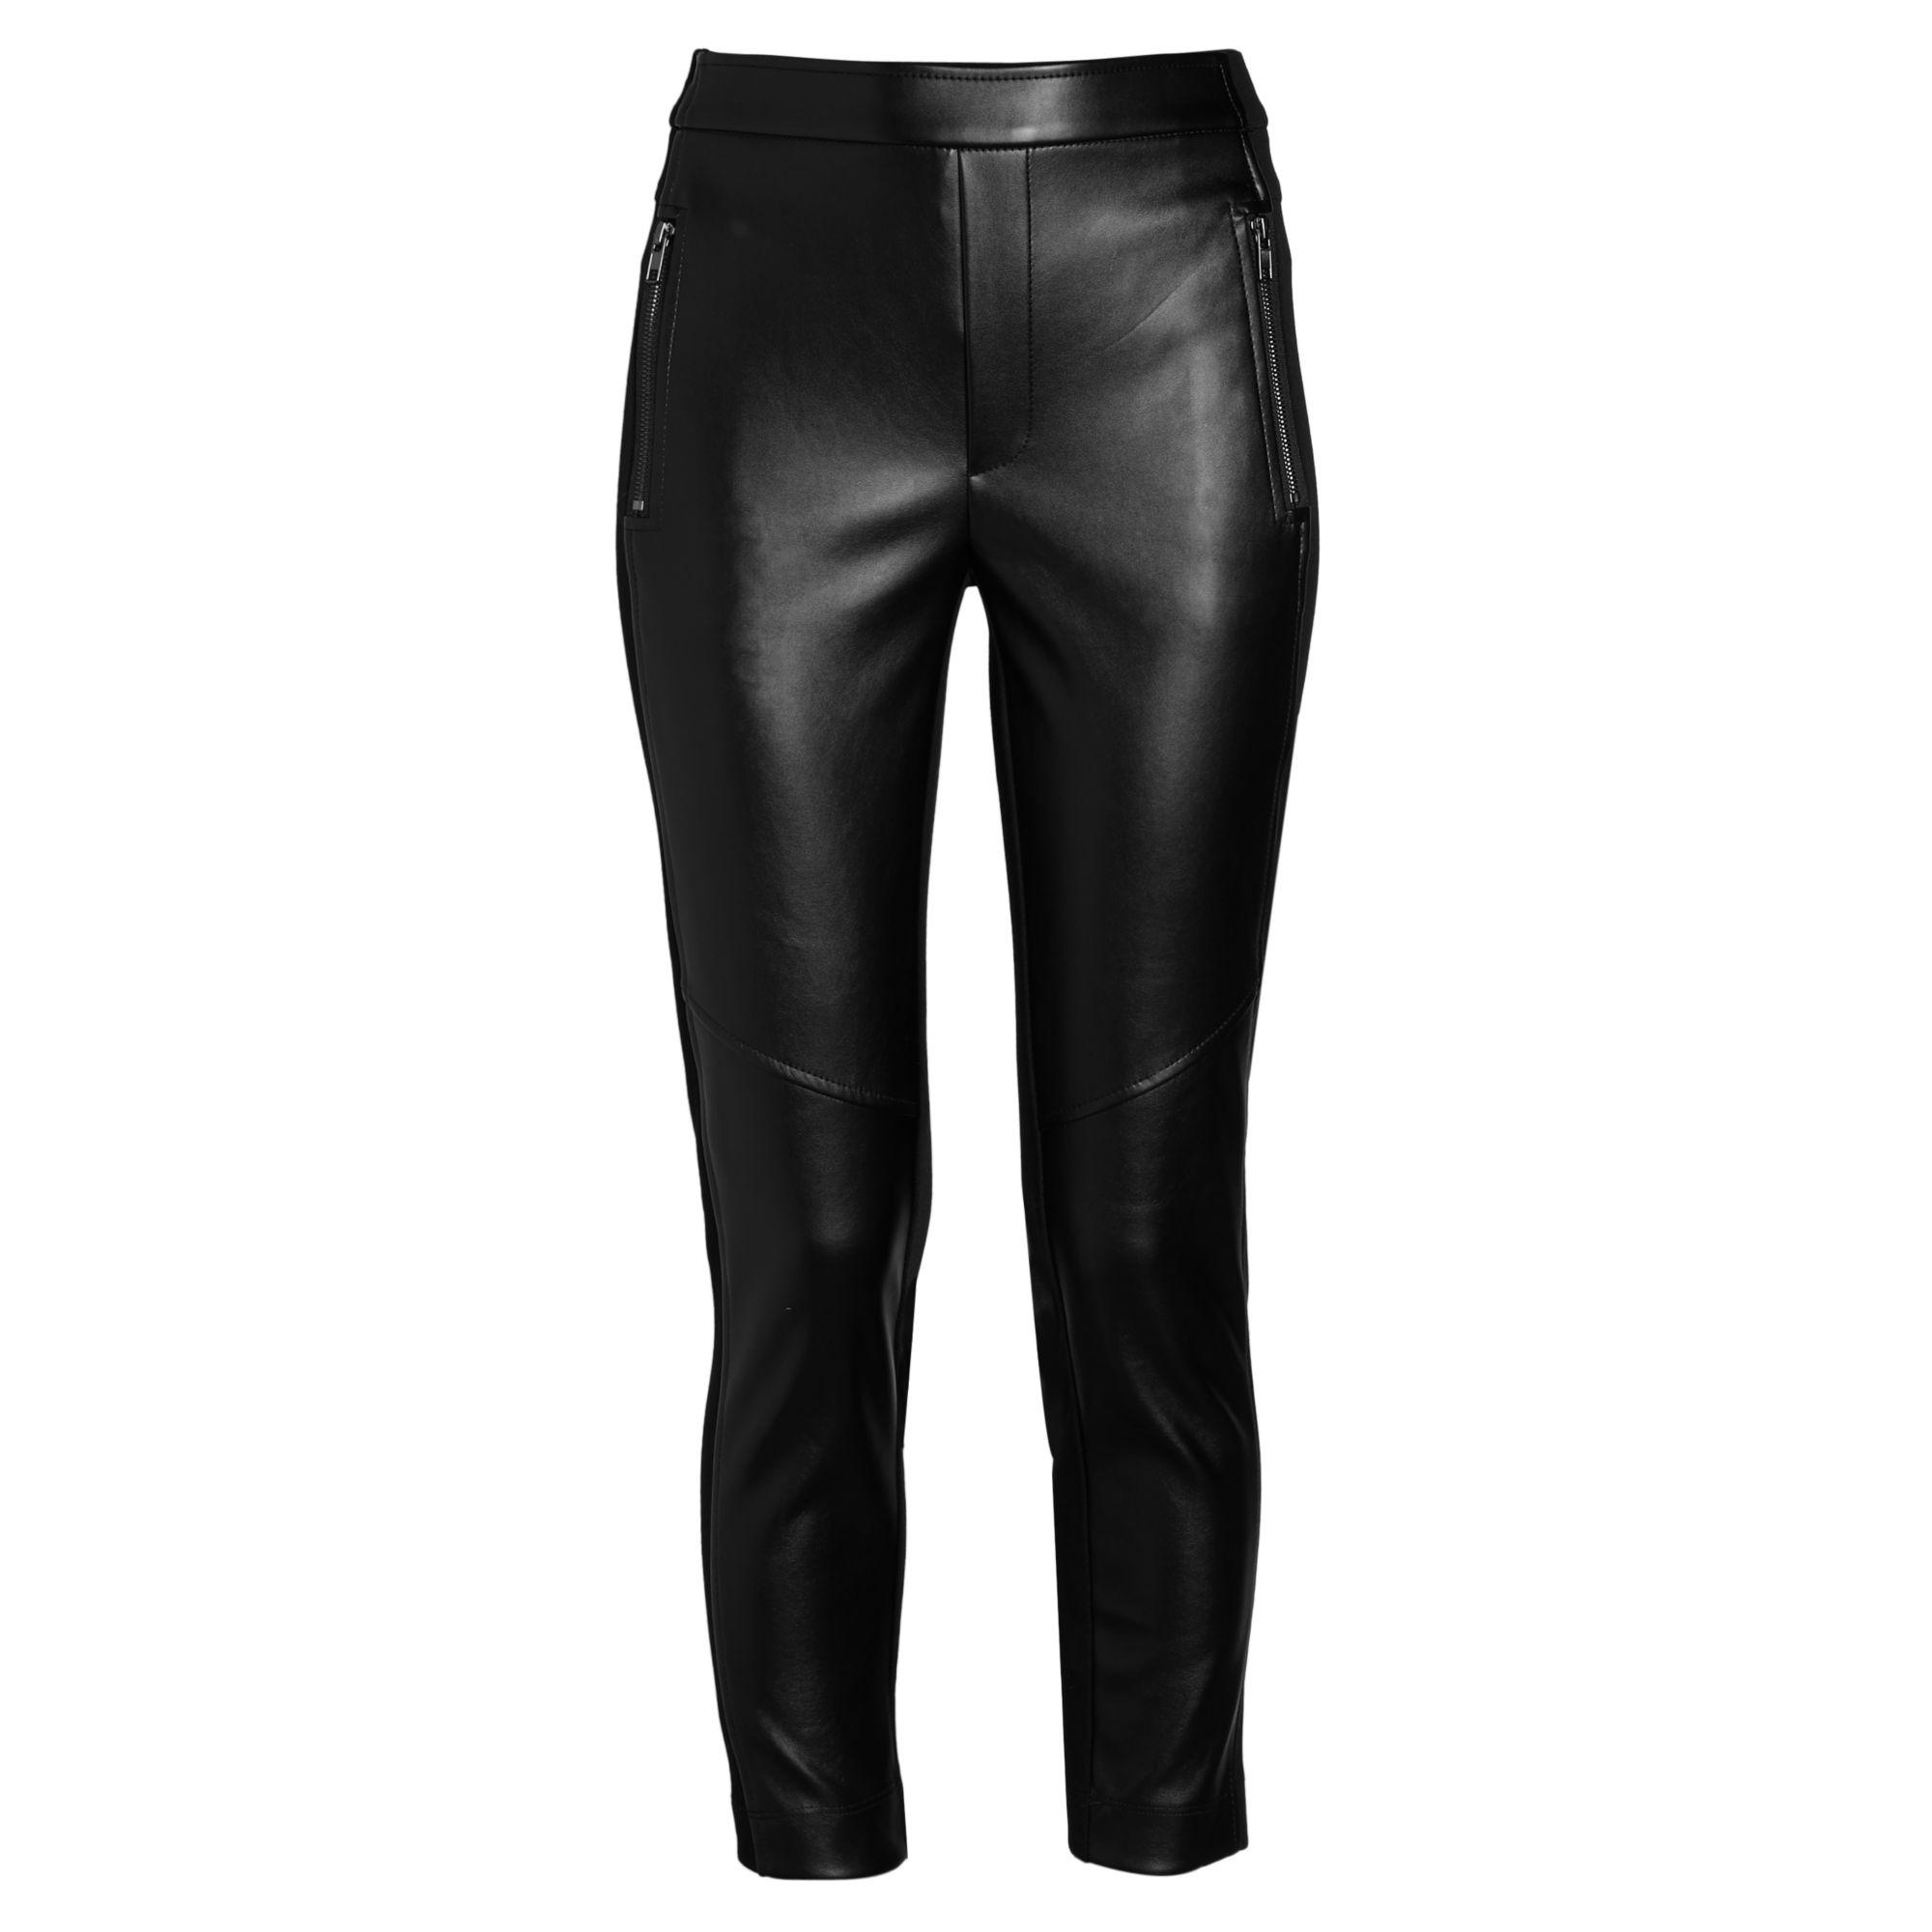 Bailey 44 Frances Faux Leather Pants in Black - Lyst